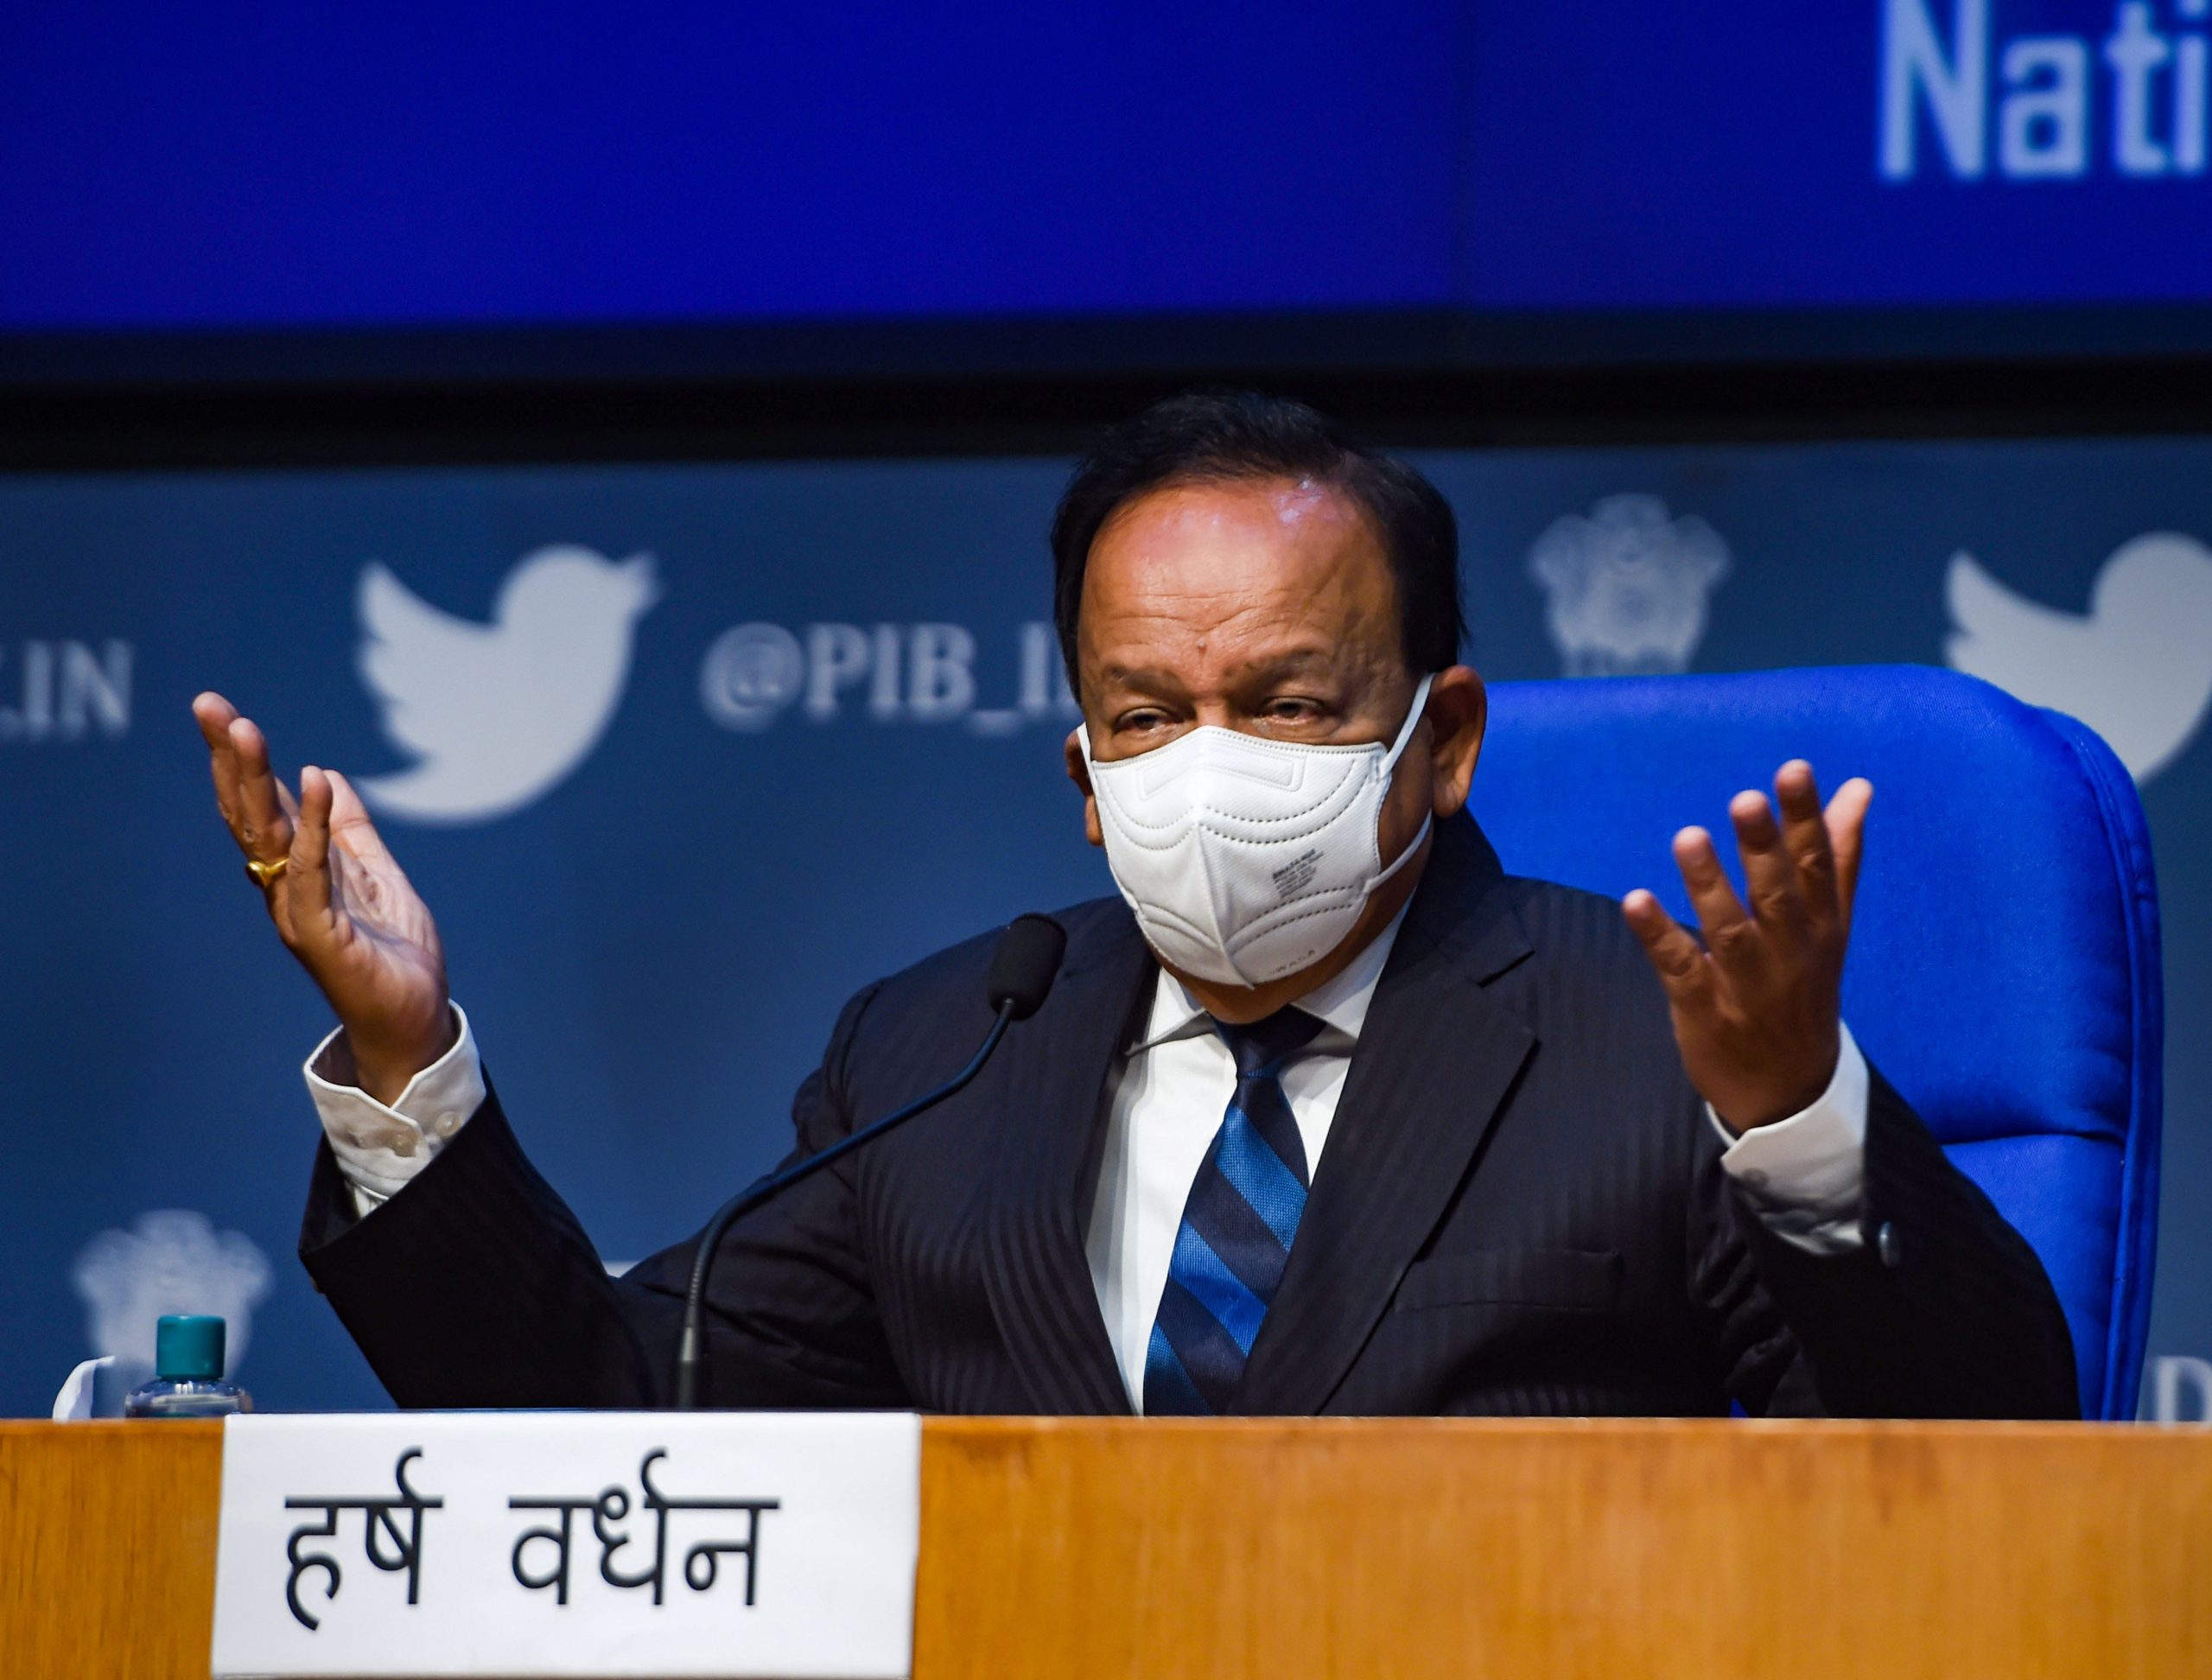 Health Minister Harsh Vardhan urges people to stay away from misinformation about COVID-19 vaccines